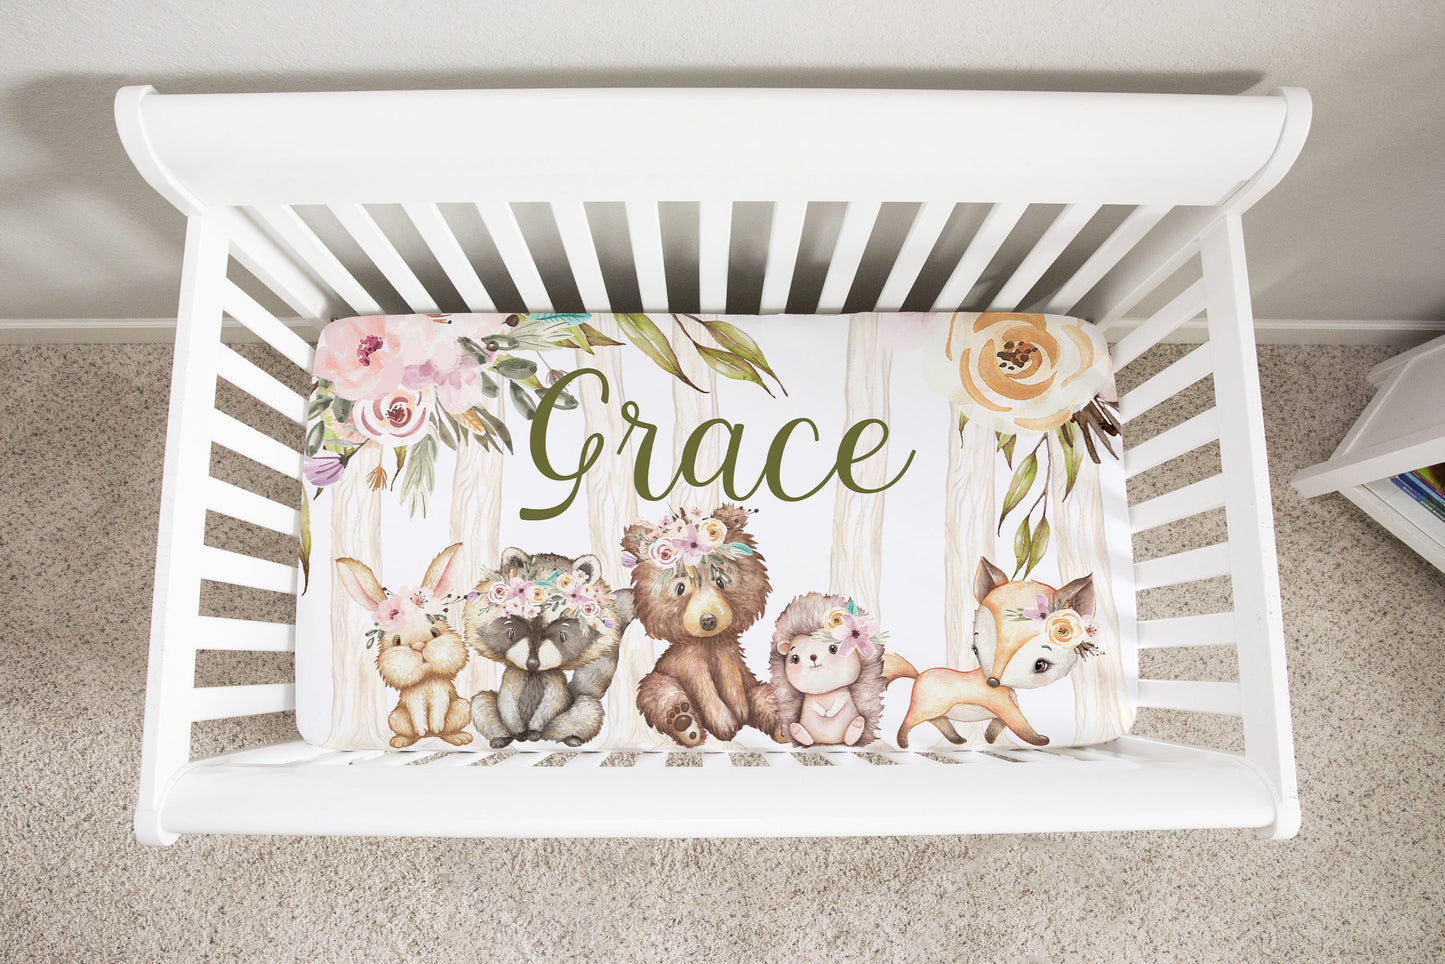 Woodland girl Personalized Crib Sheet, Forest Baby Girl Nursery Bedding - Forest Friends